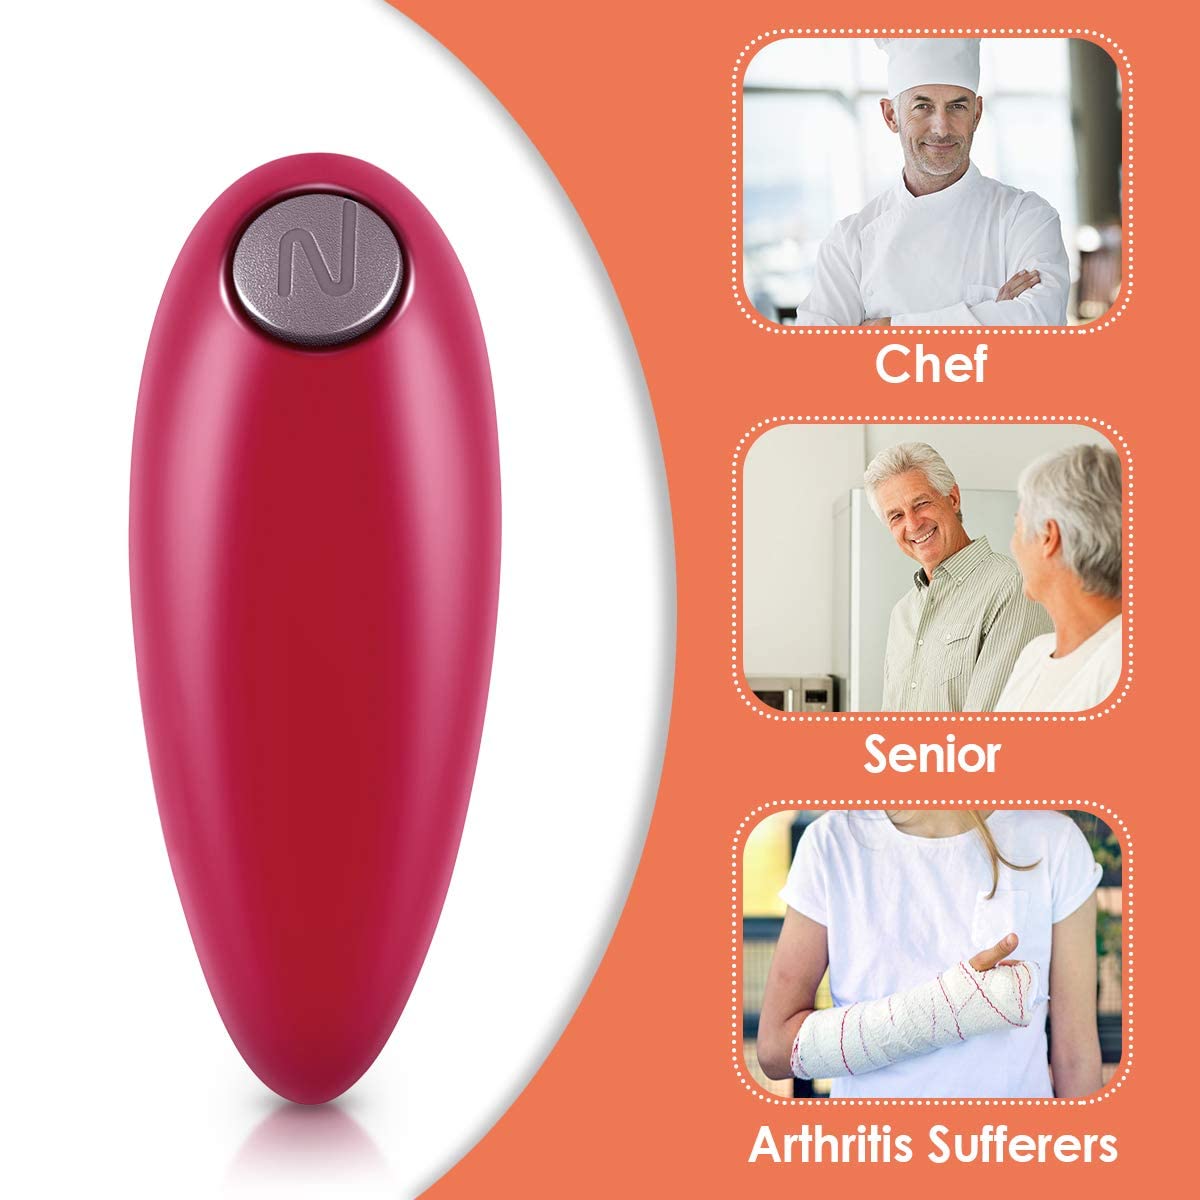 Electric Can Opener, Battery Operated Electric Can Openers for Kitchen, One Touch Automatic Can Opener Smooth Edge, Best Choice Can Opener Electric for Seniors with Arthritis, Kids, Cooks, Housewives